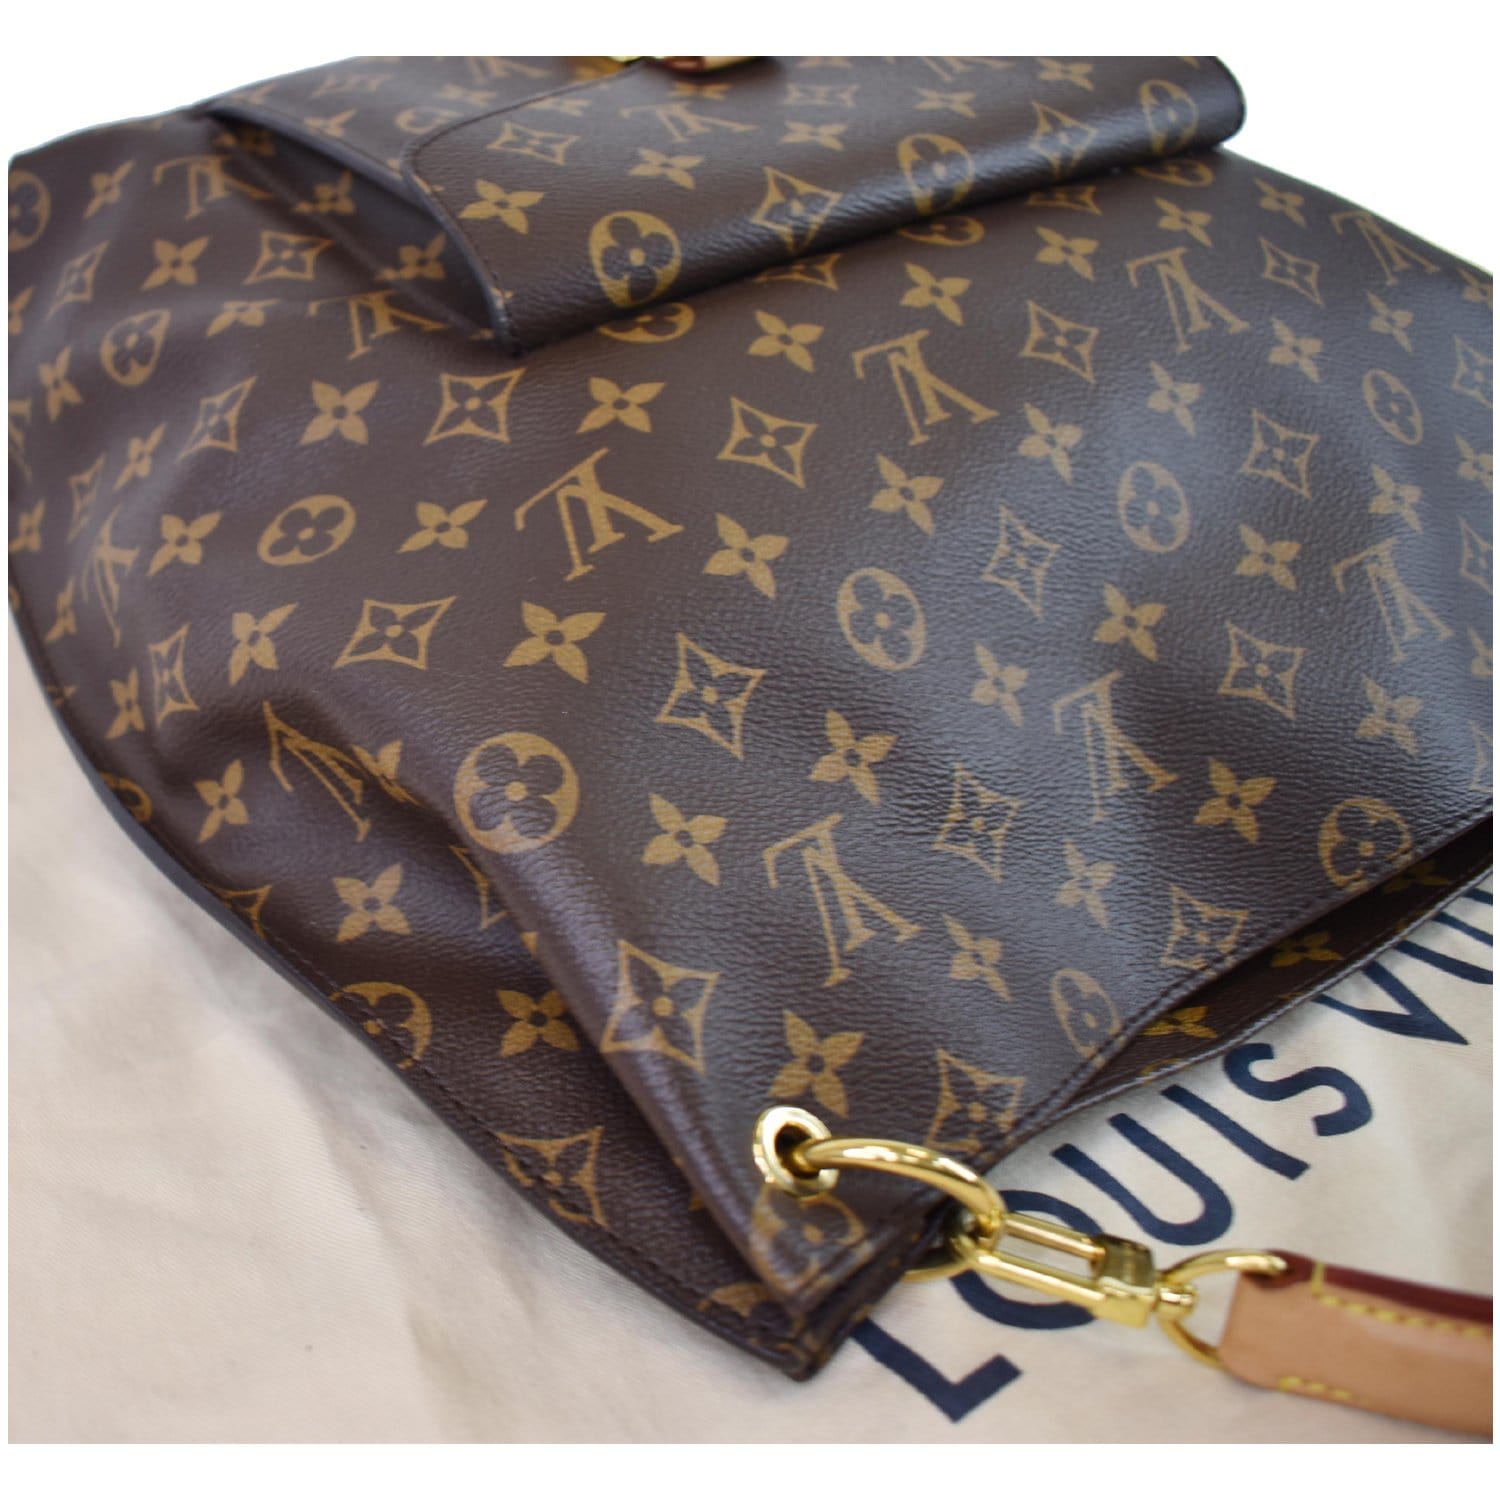 Ace Essentials - Price: ₦18,000 Brand: lv metis hobo Color: Size: big  --------------- 👇HOW TO ORDER👇 ---------------- ❤️: PAY ONLY TO COMPANY  ACCOUNT ---------------- ❤️: ACE ESSENTIALS ❤️: 010146